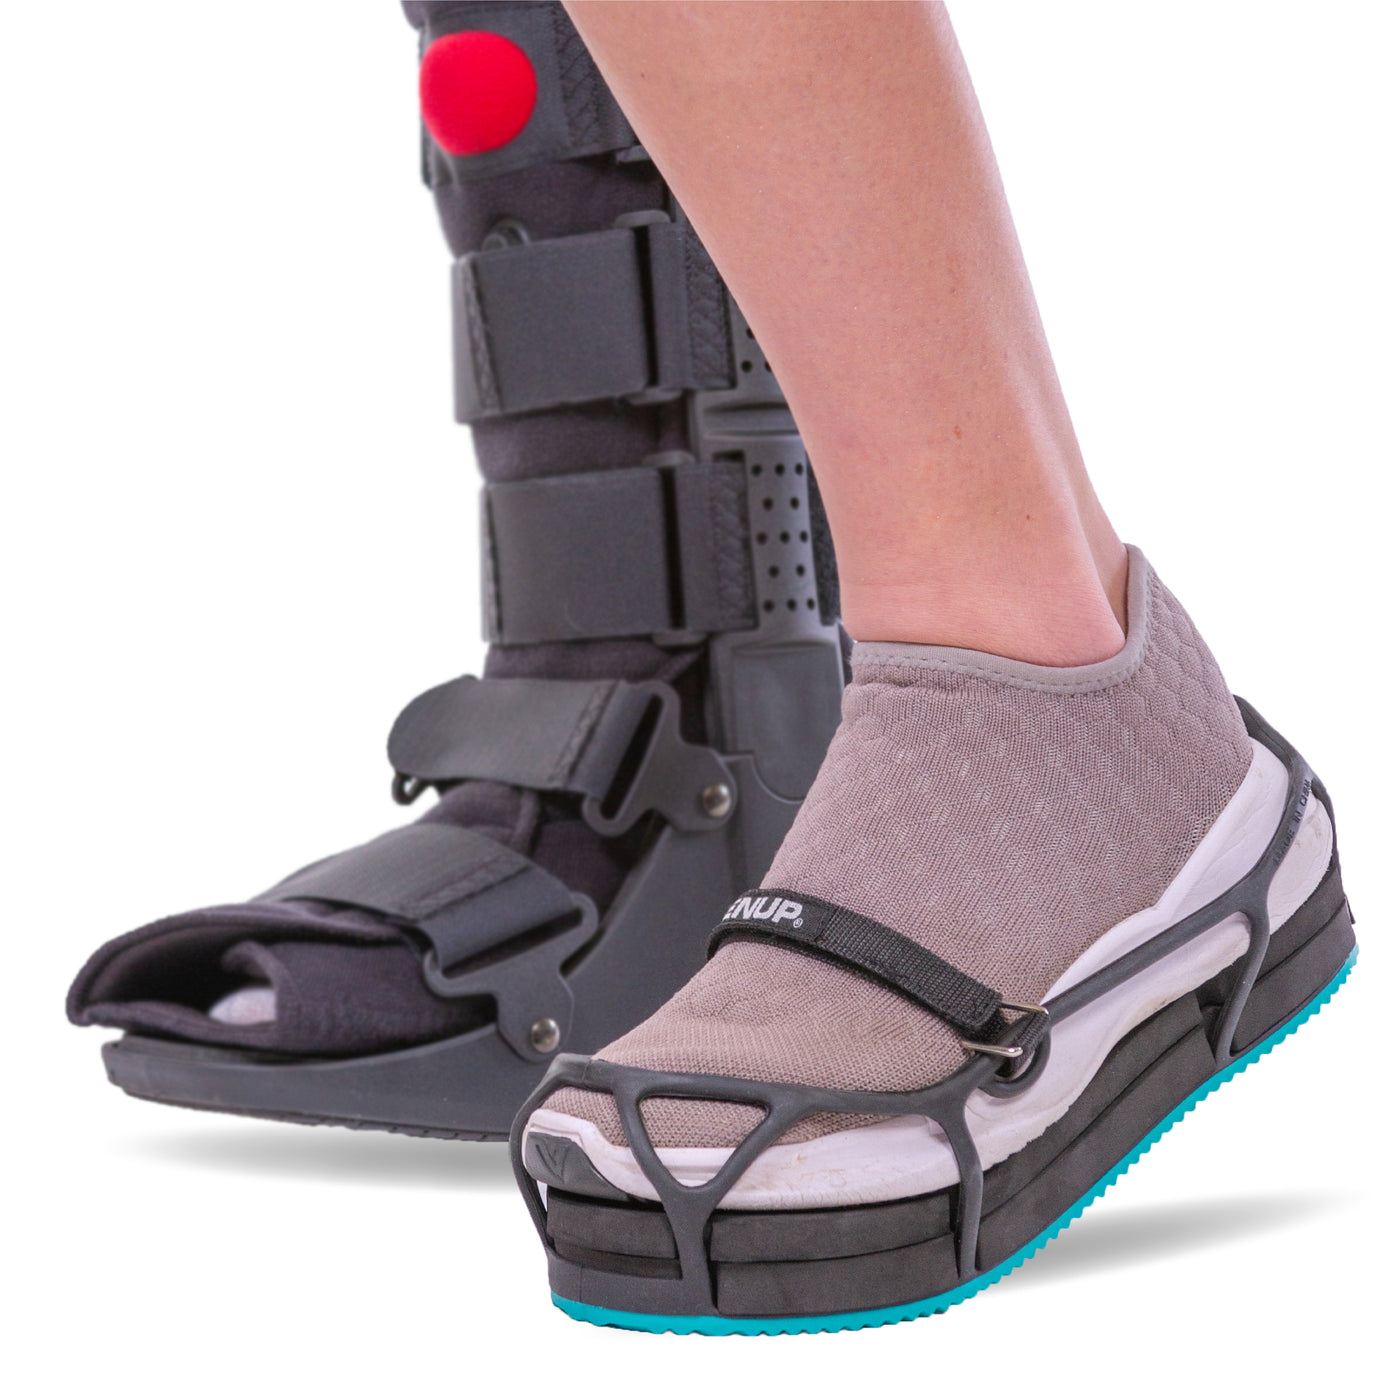 the EVENup shoe balancer keeps your hips level while wearing a walking boot